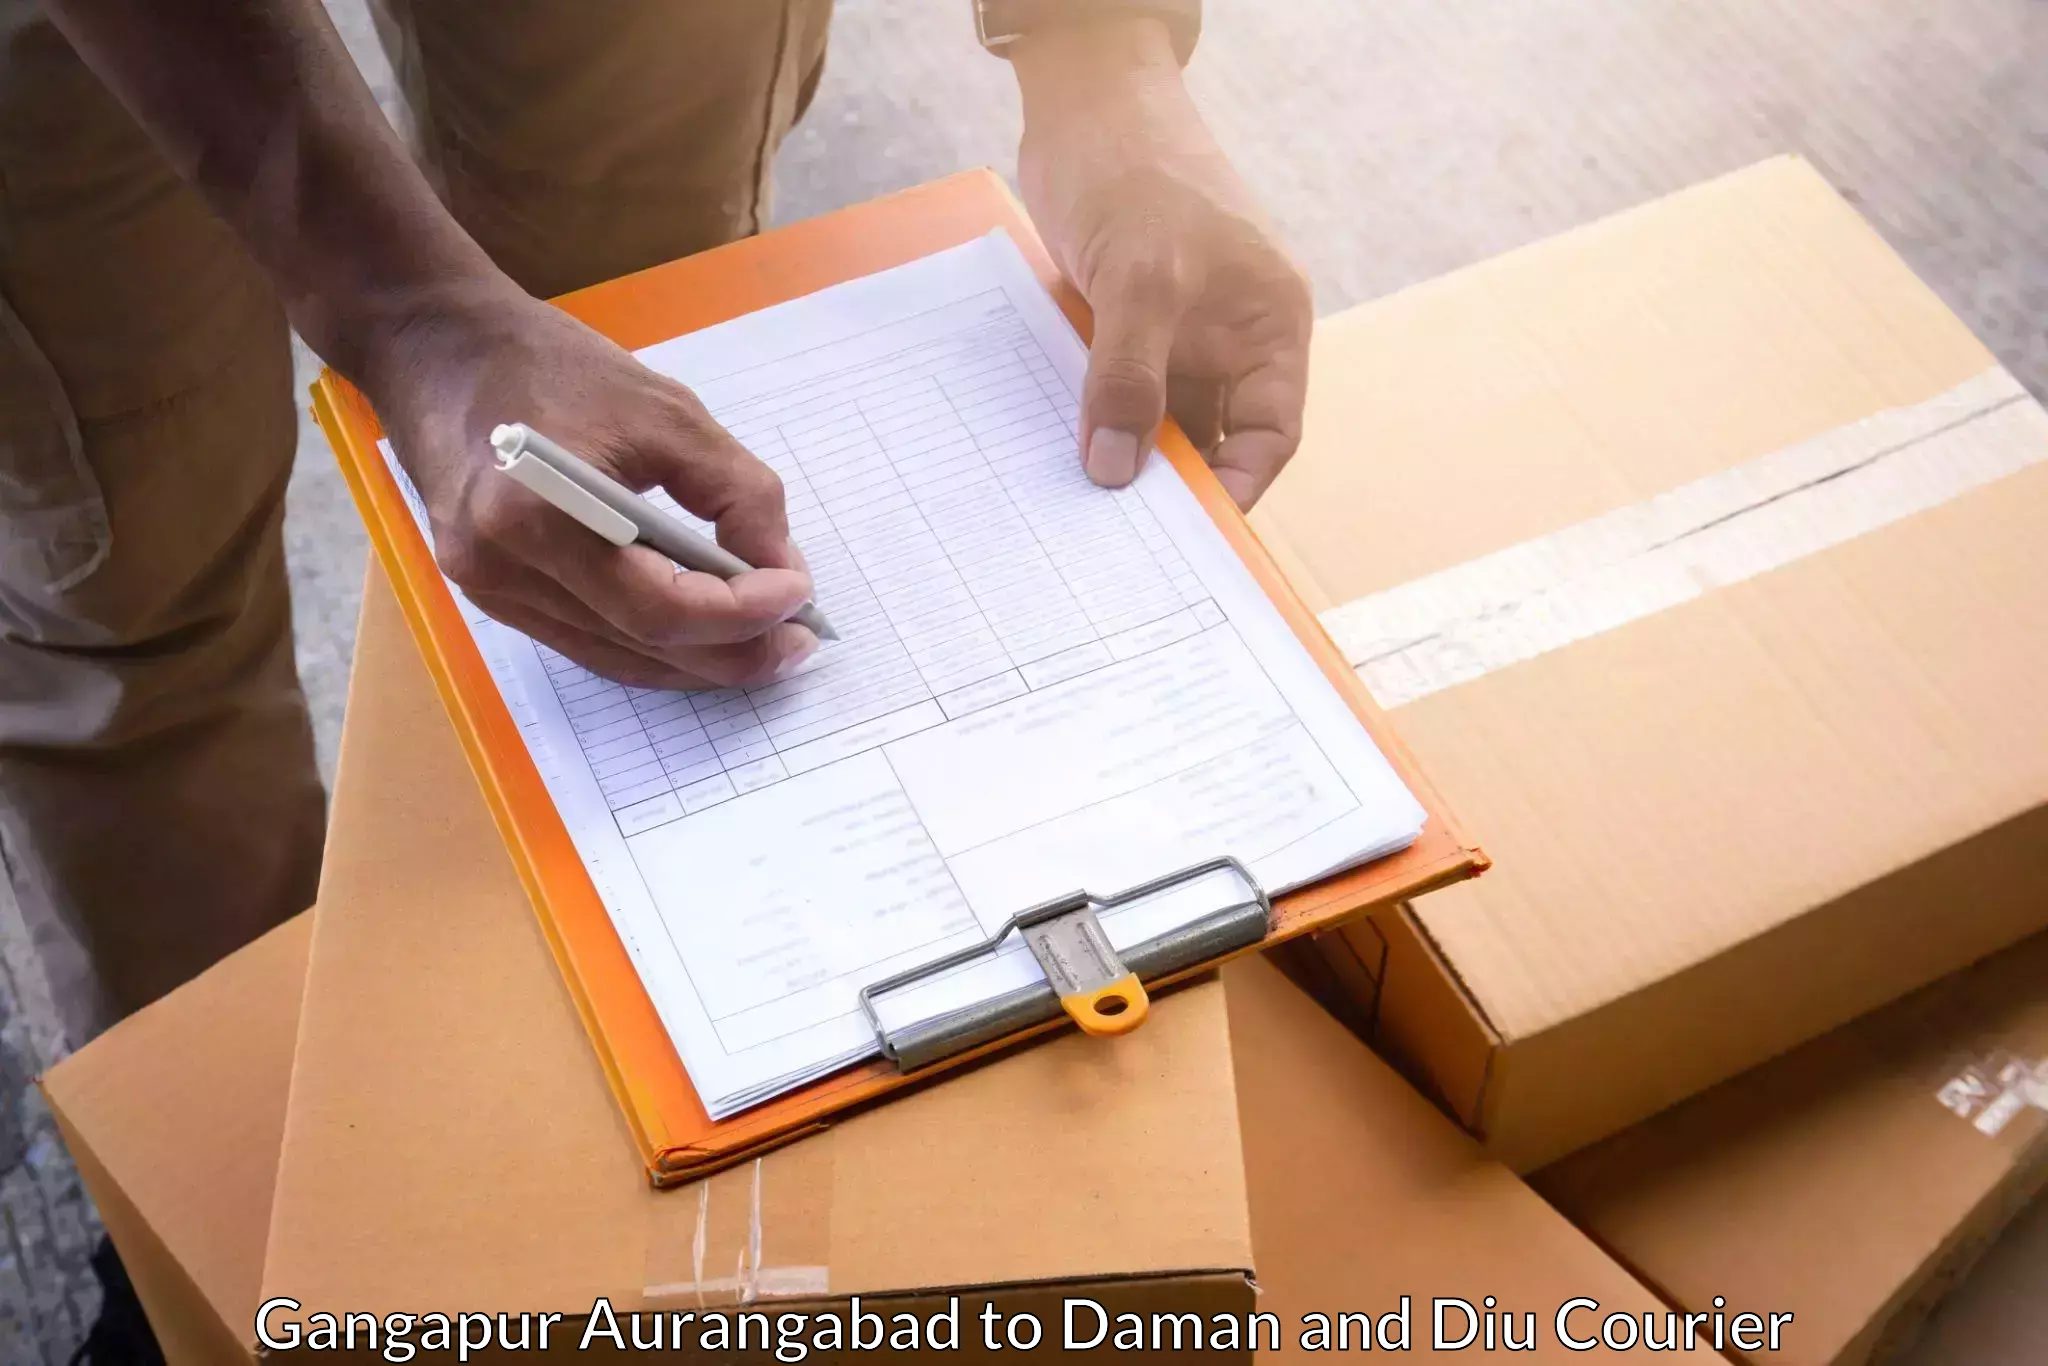 Tailored delivery services Gangapur Aurangabad to Diu